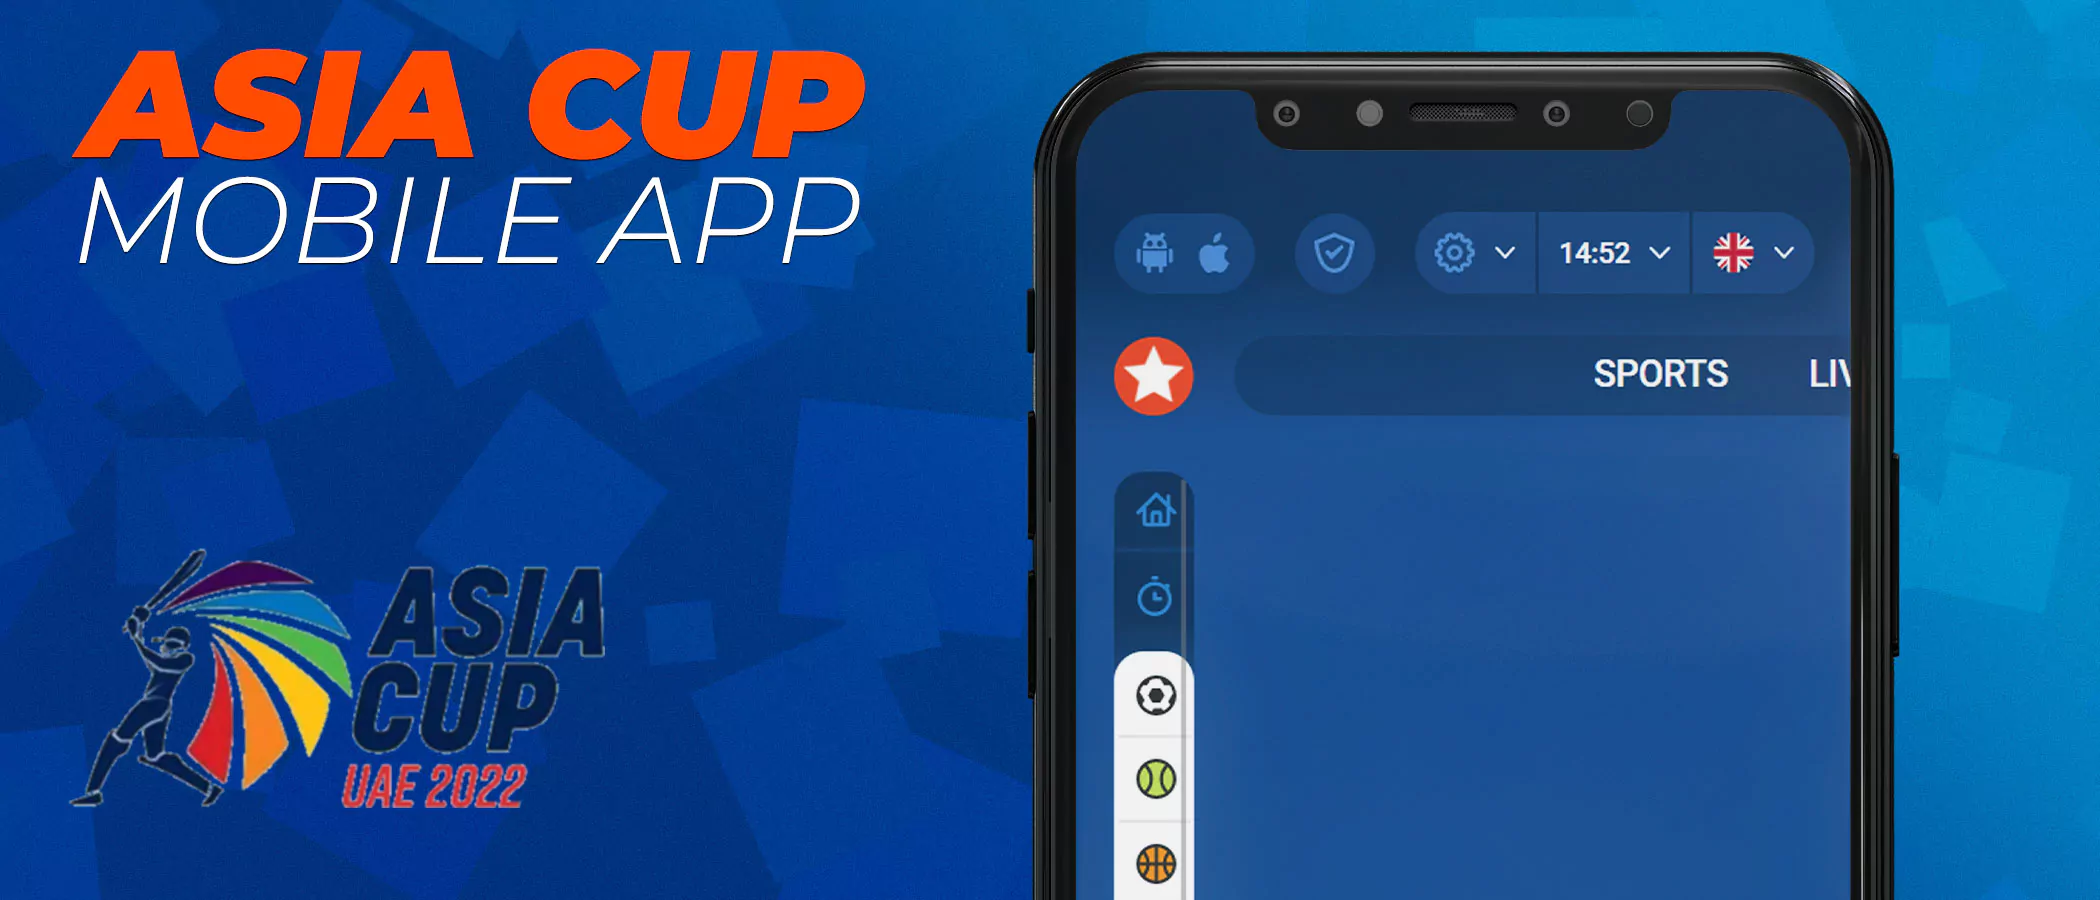 The Best Asia Cup Betting App